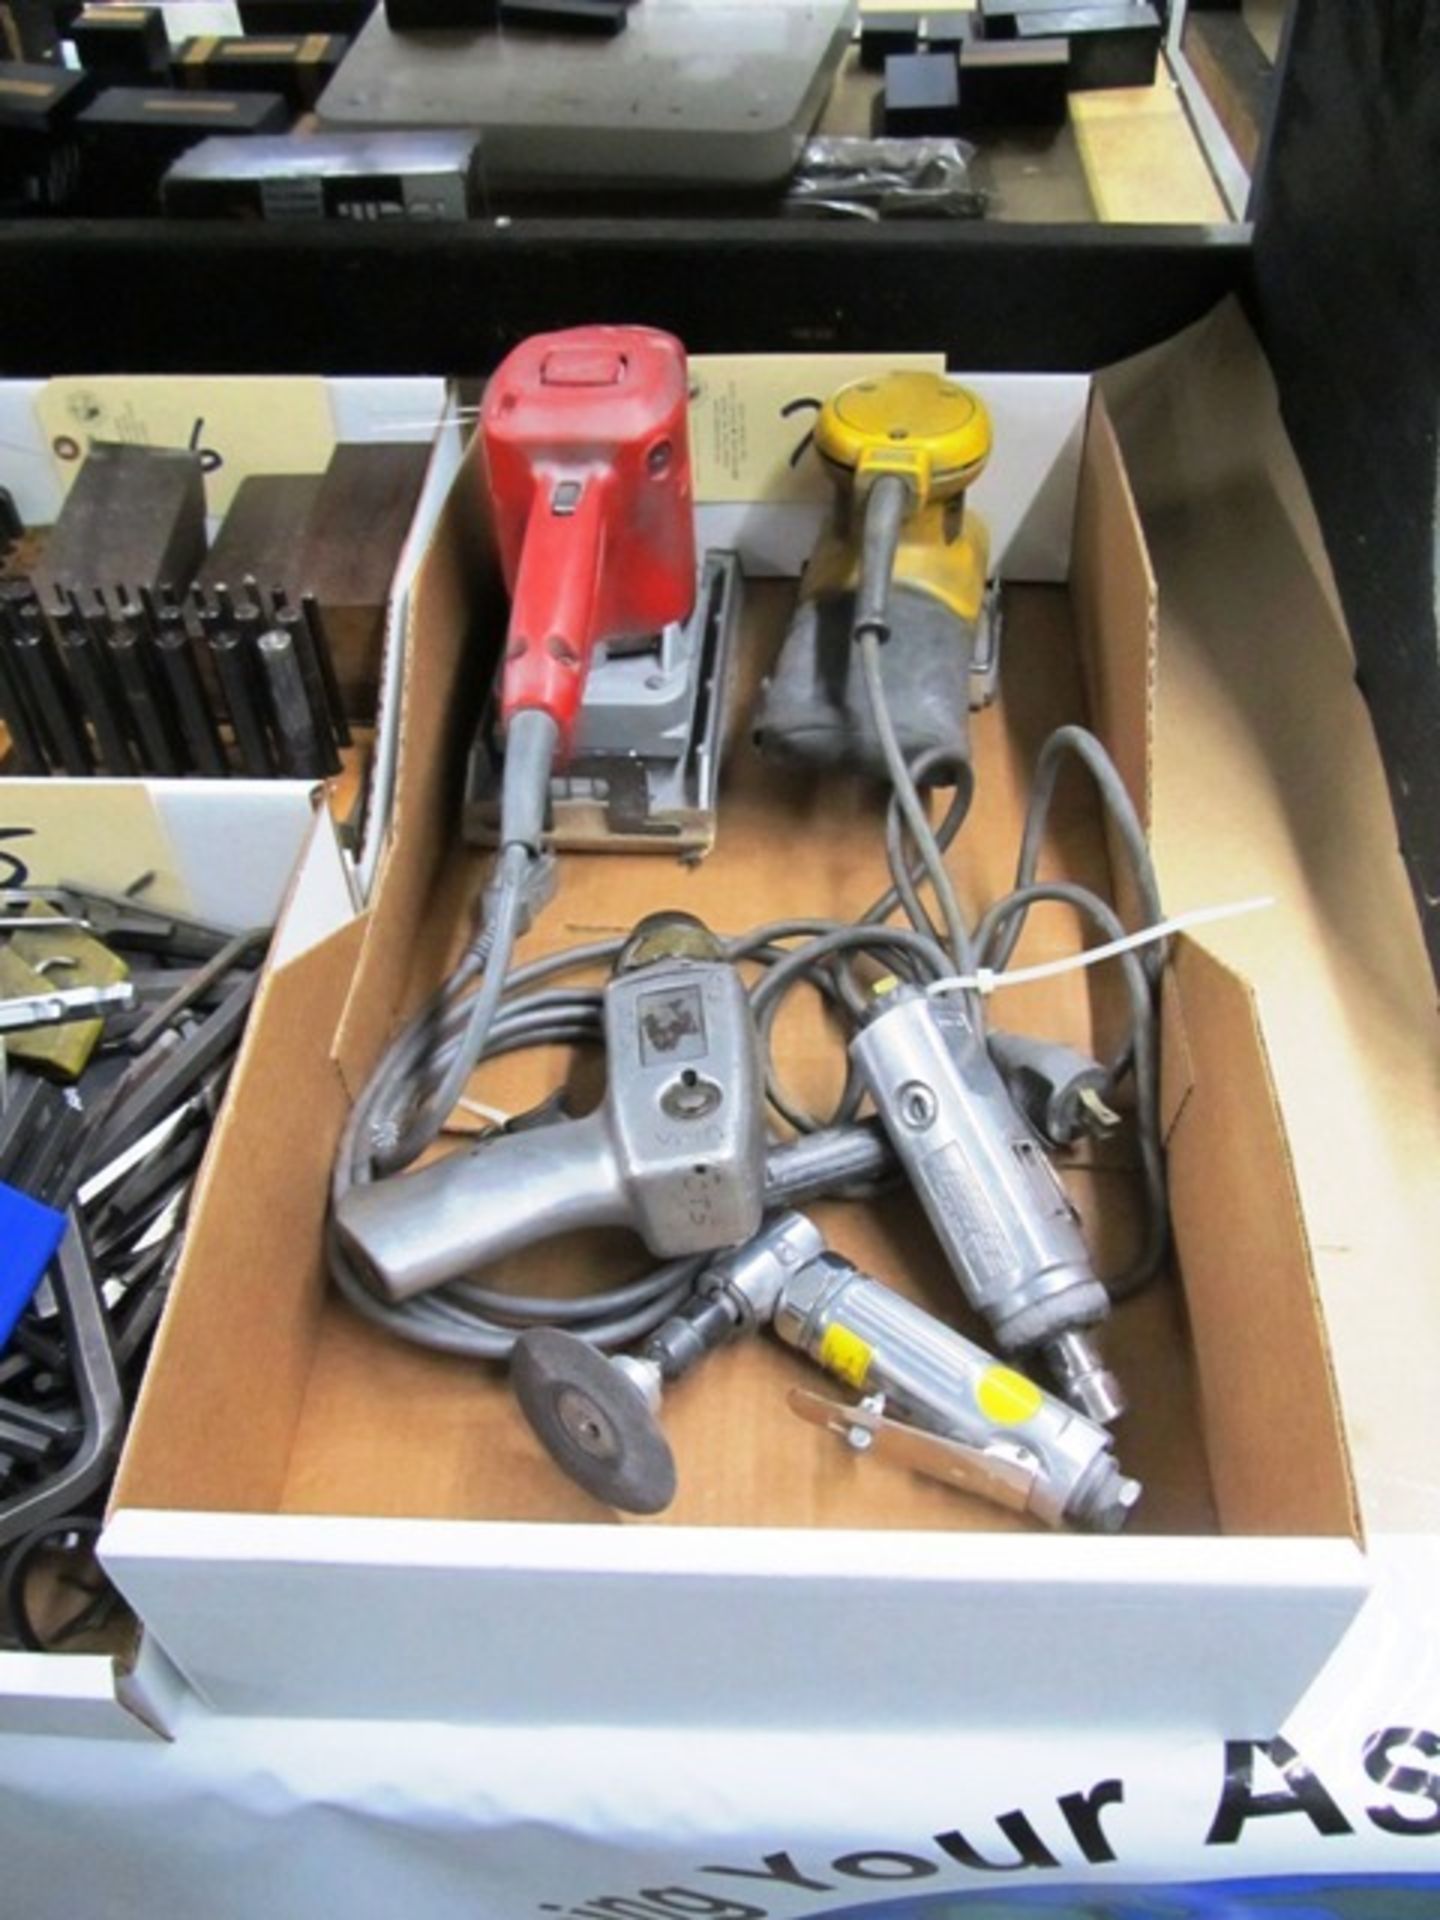 (2) Electric Sanders & (3) Assorted Pneumatic Tools